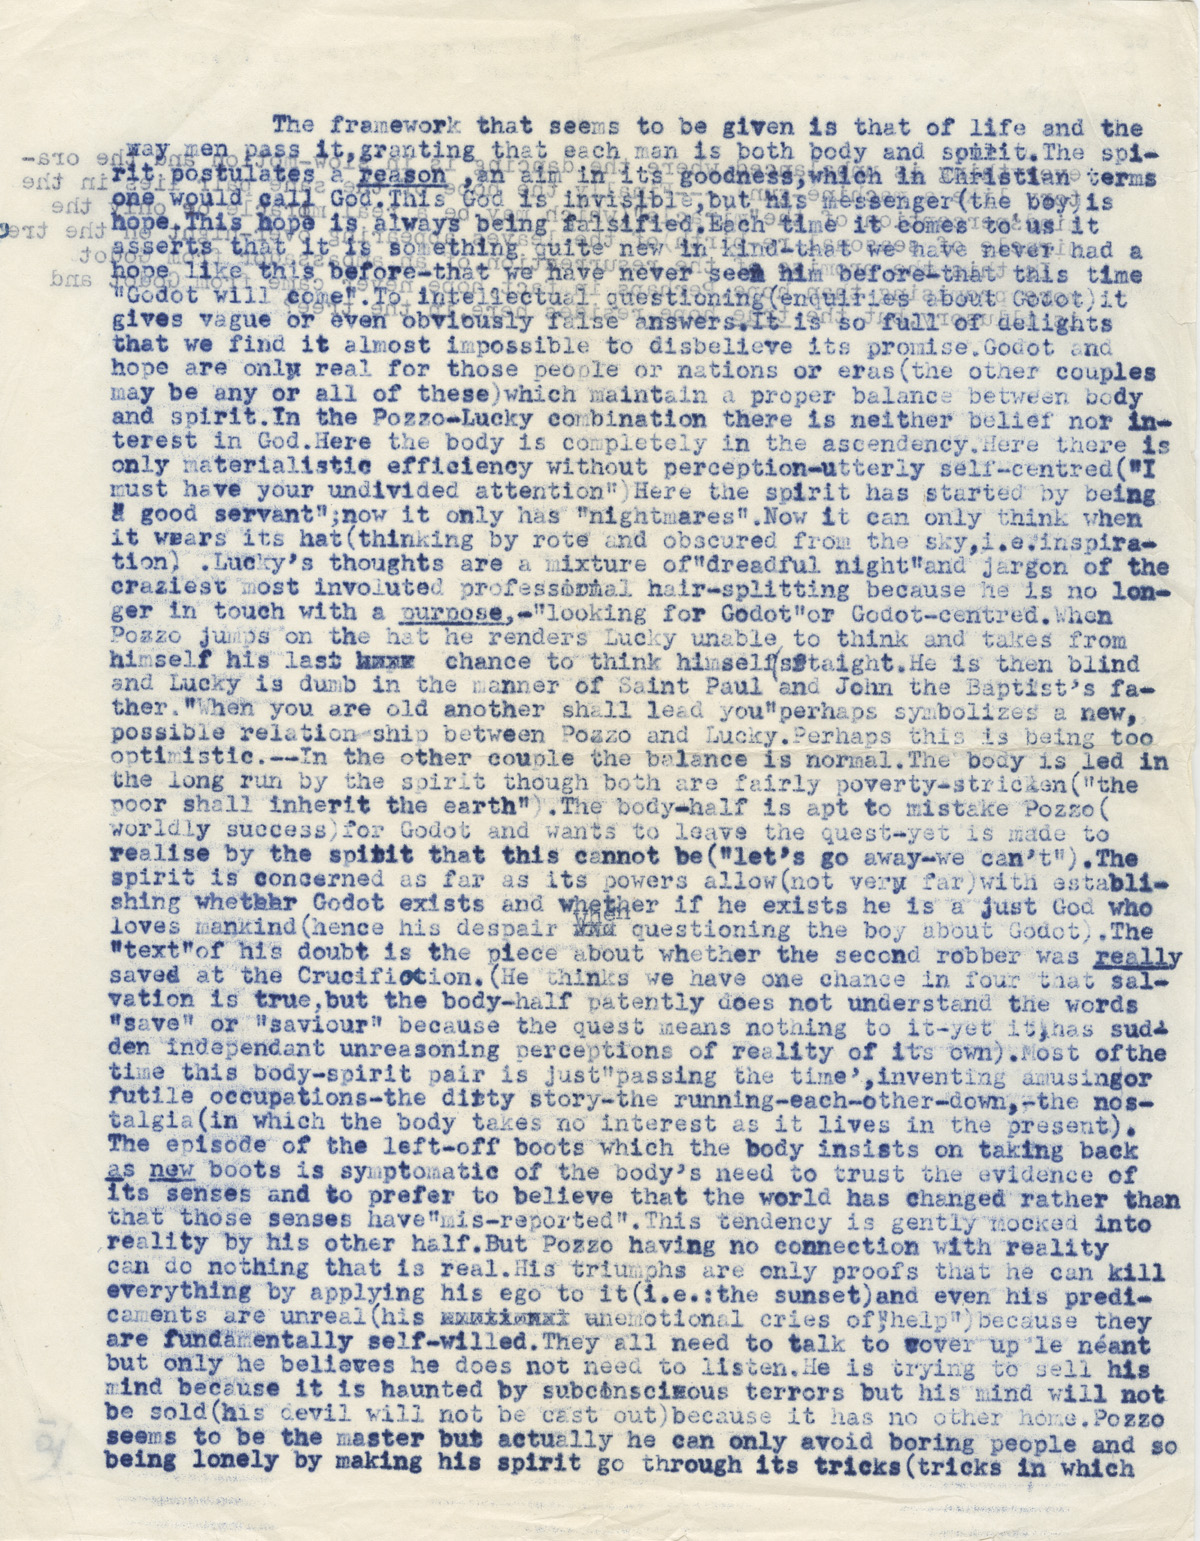 Letter from Samuel Beckett to Maya Peron. Dated June 12, 1969. The Carlton Lake Collection. Reprinted by permission of Georges Borchardt, Inc. All rights reserved.